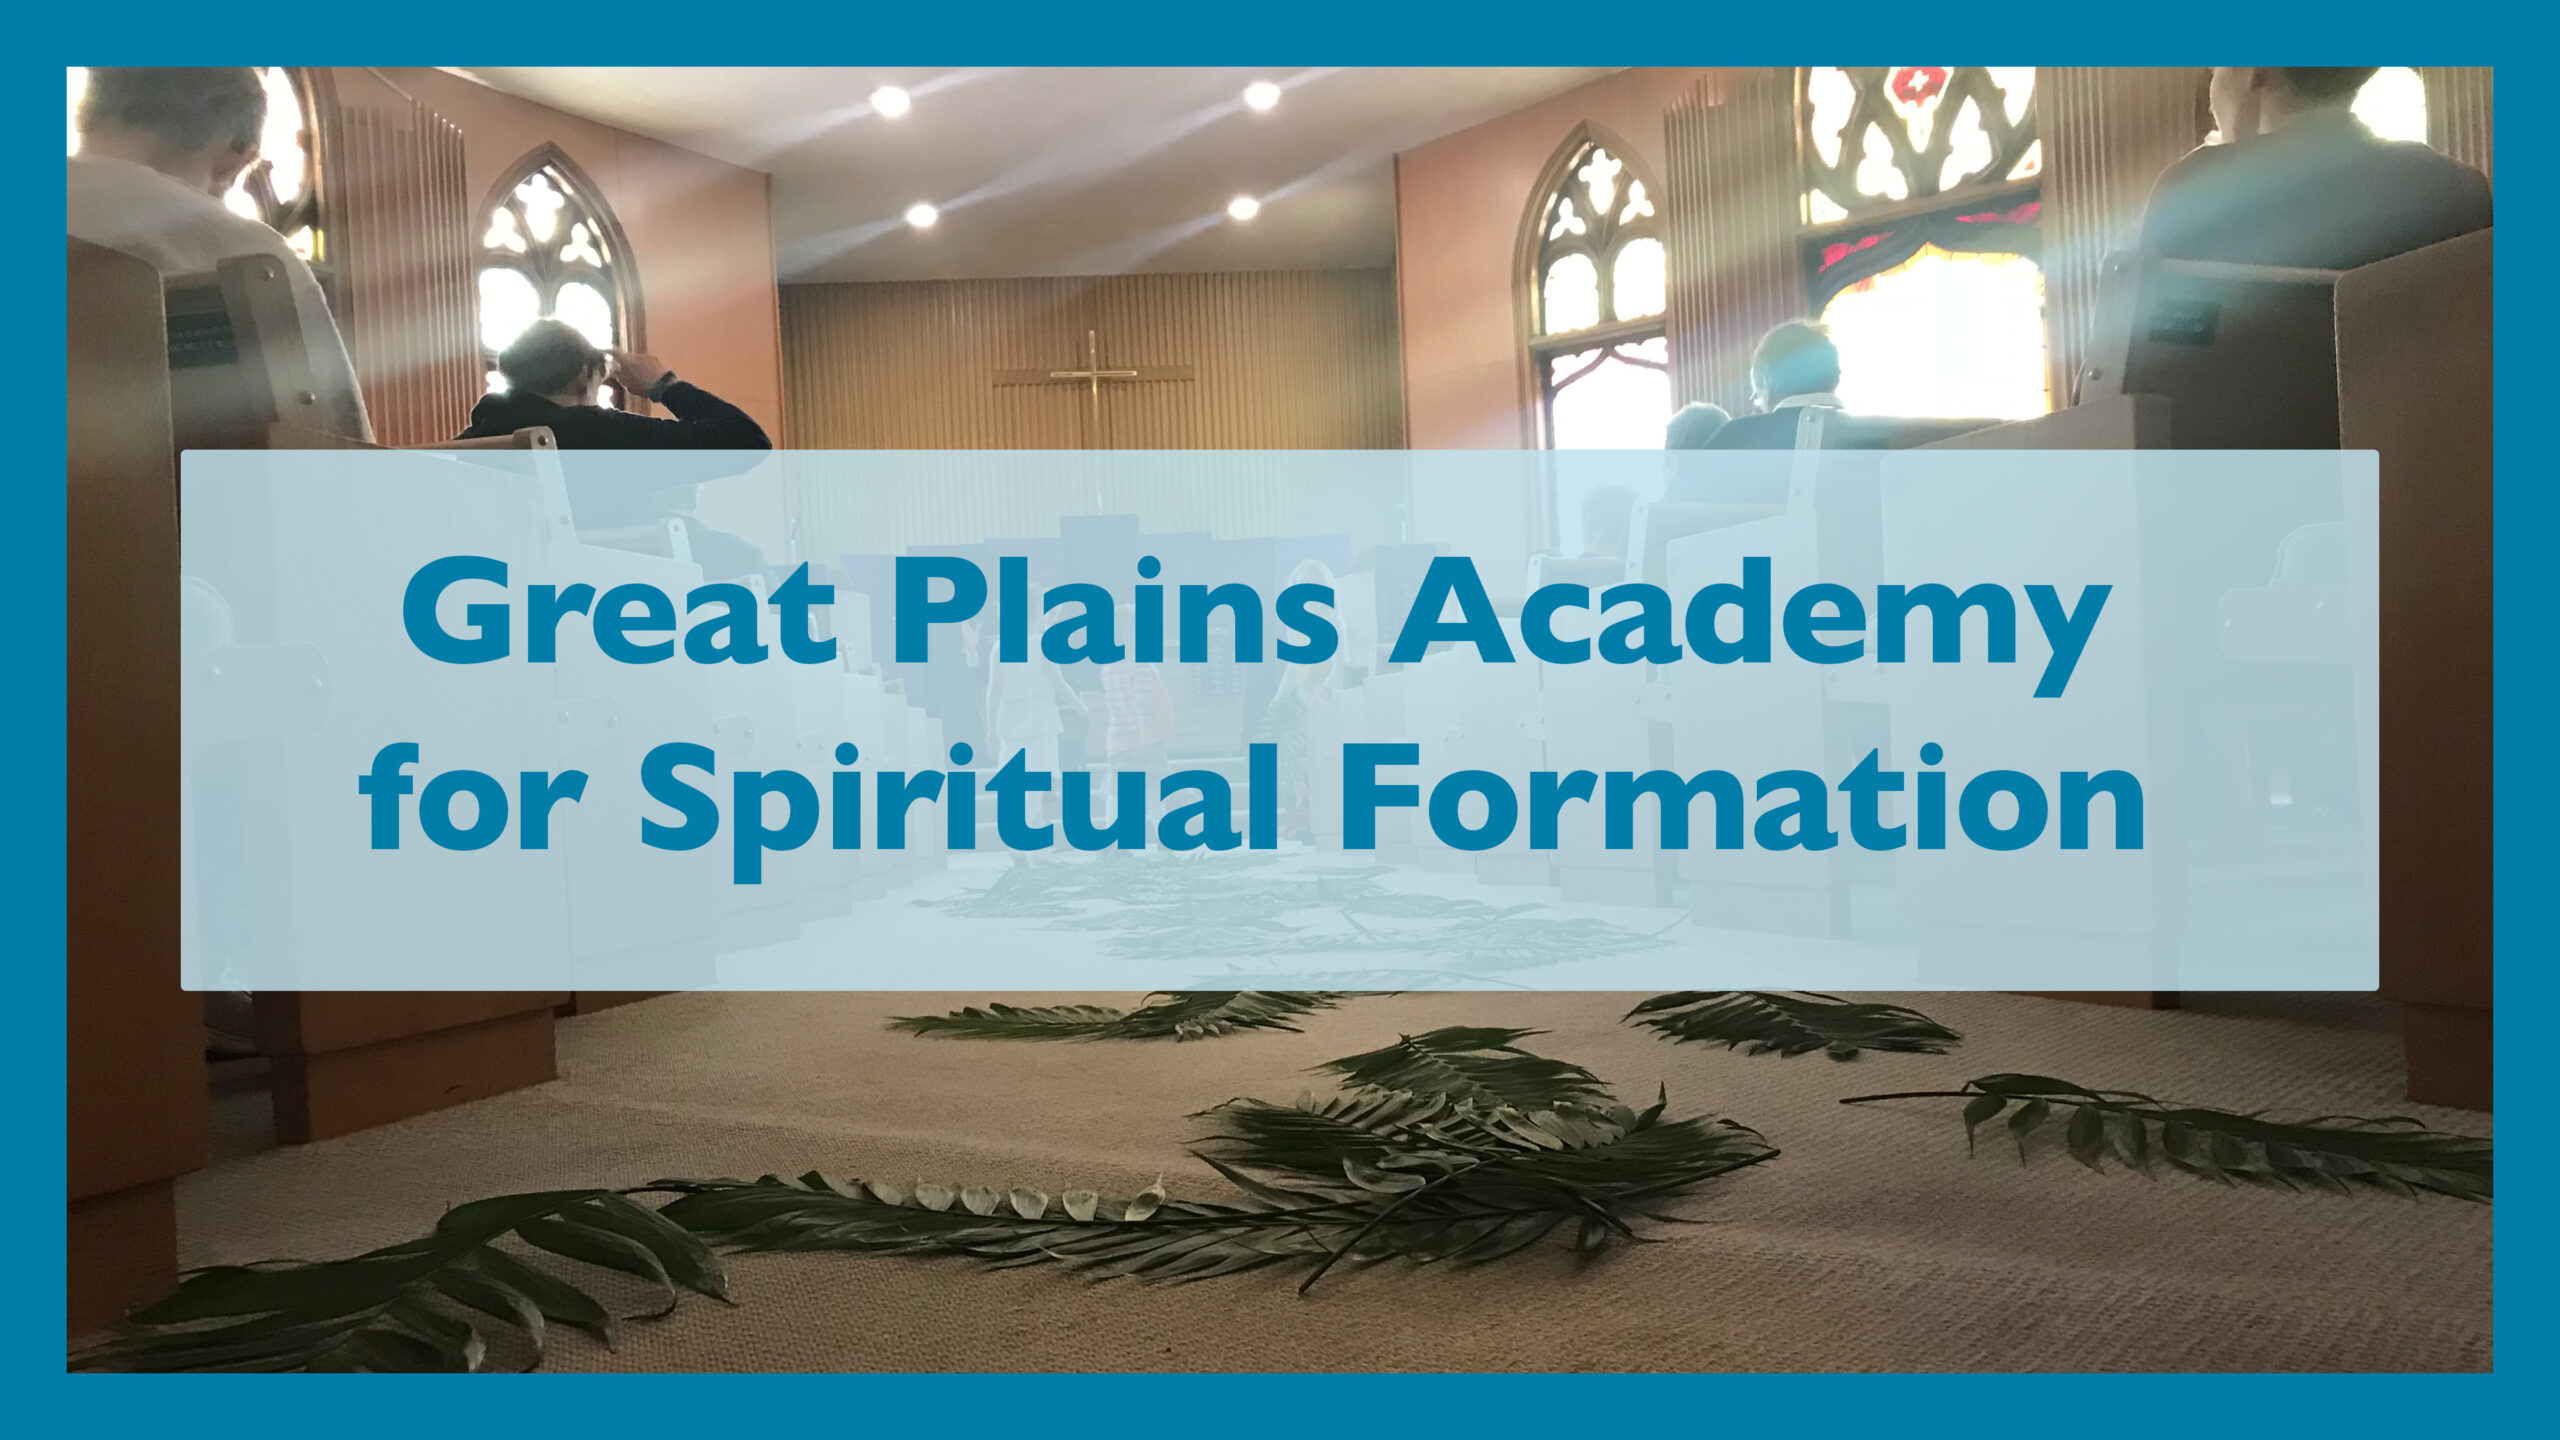 Great Plains Academy for Spiritual Formation